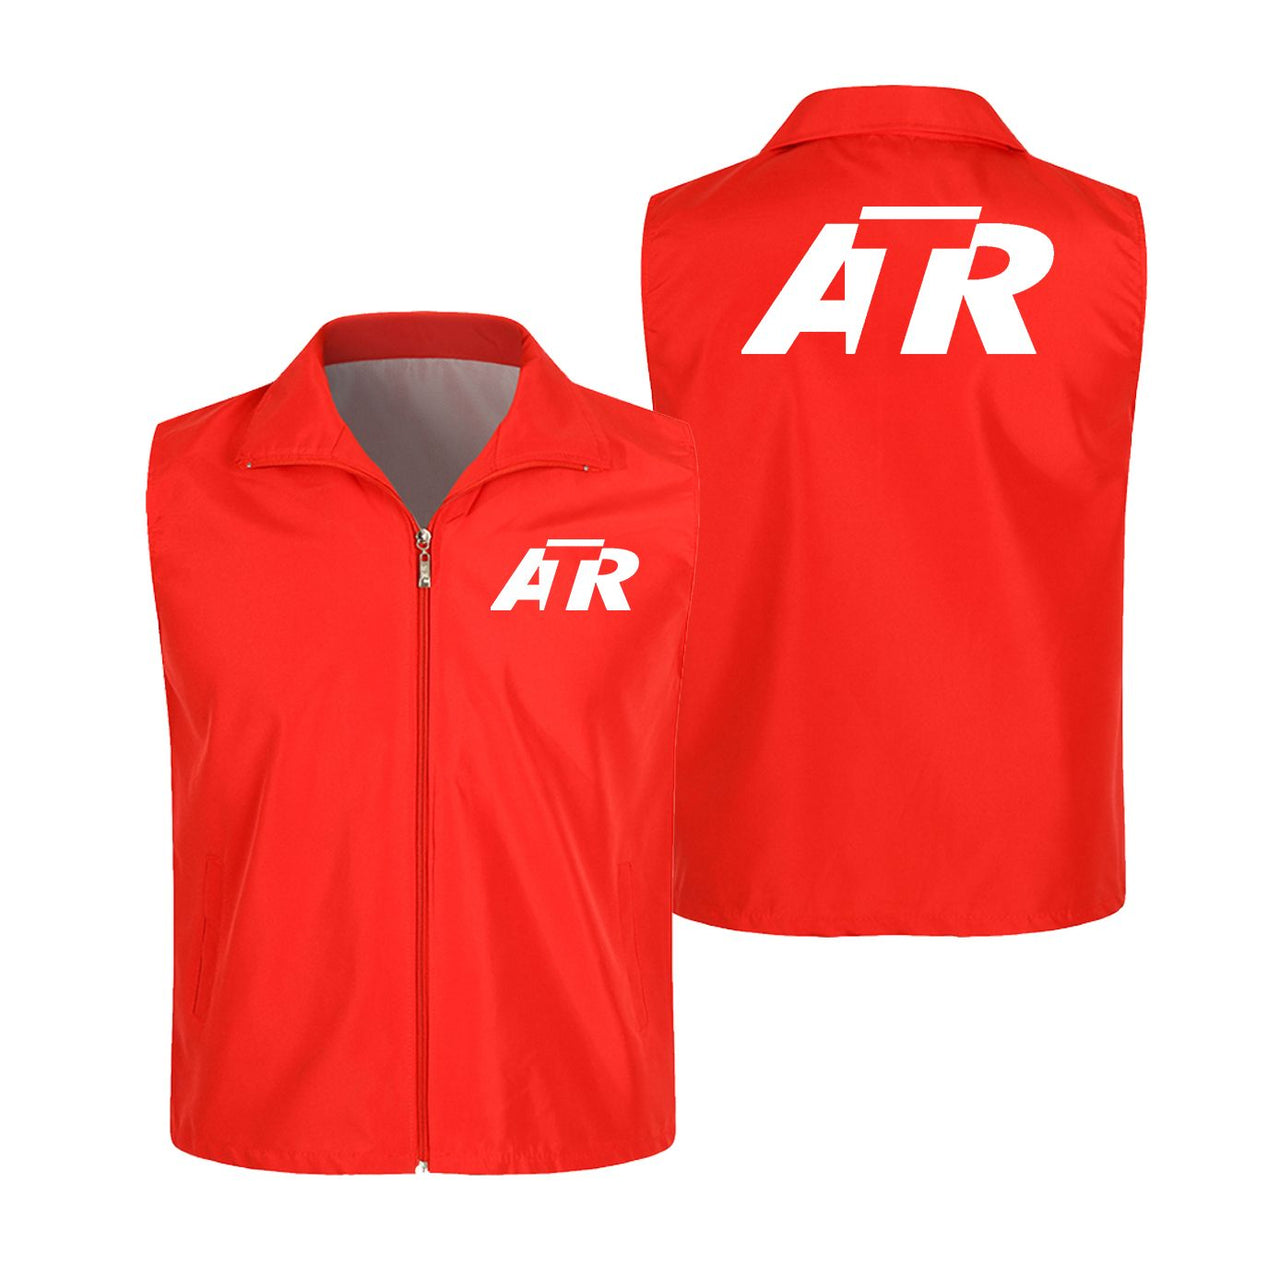 ATR & Text Designed Thin Style Vests